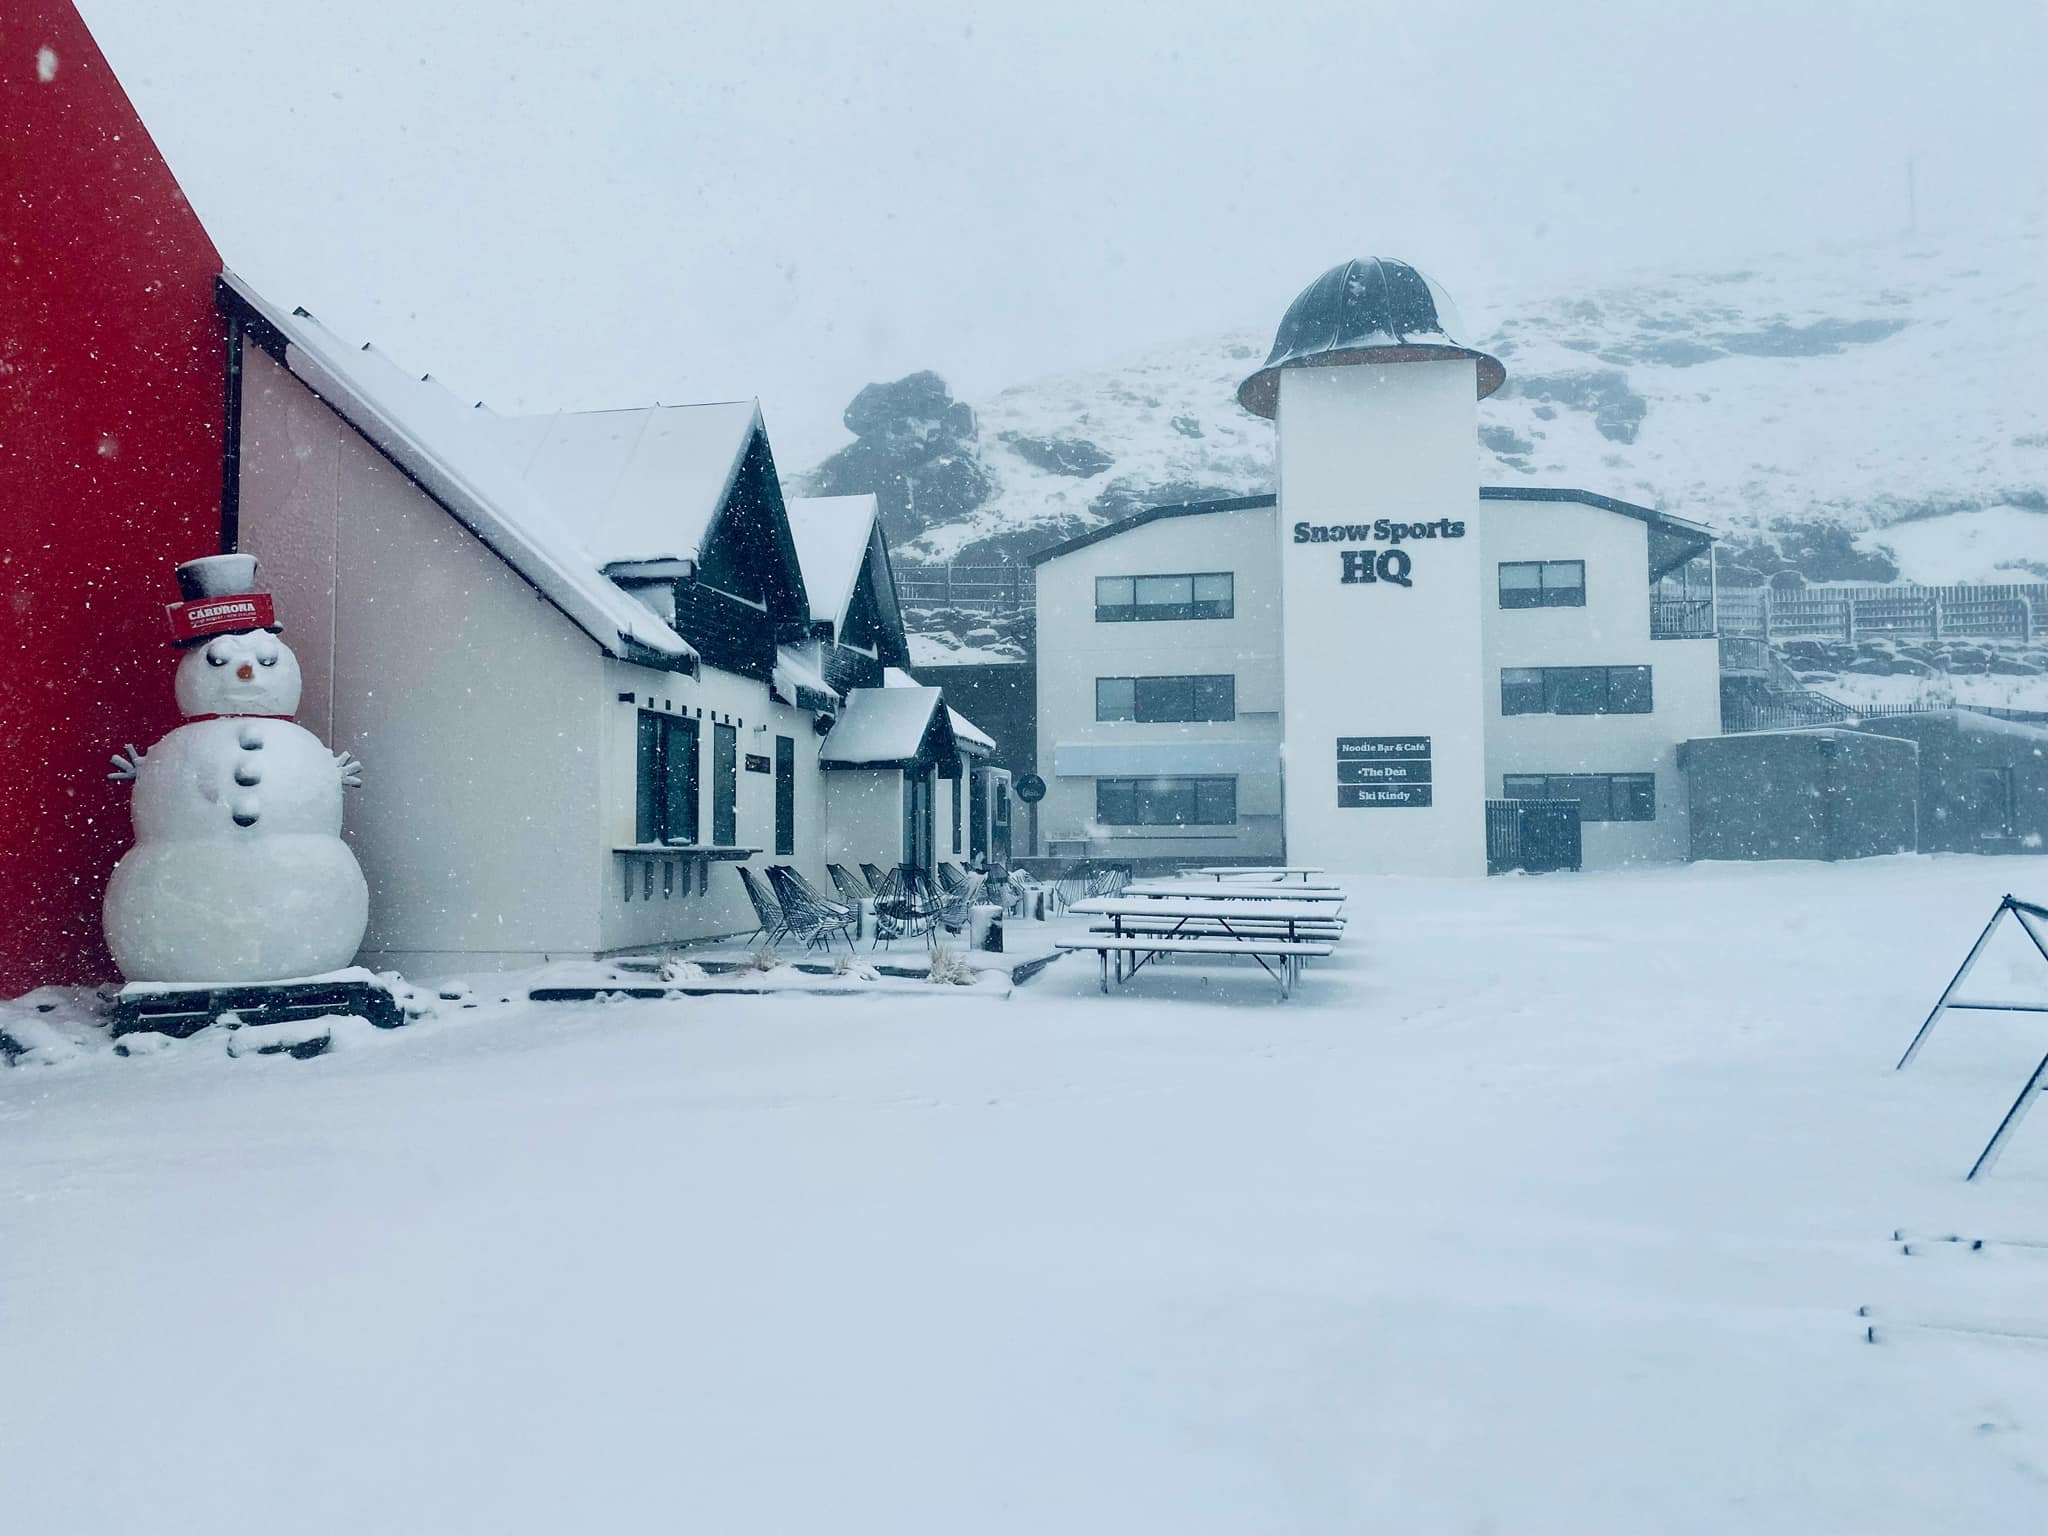 Early snowfall is dropping in New Zealand. Photo Credit: Cordrona Ski Area